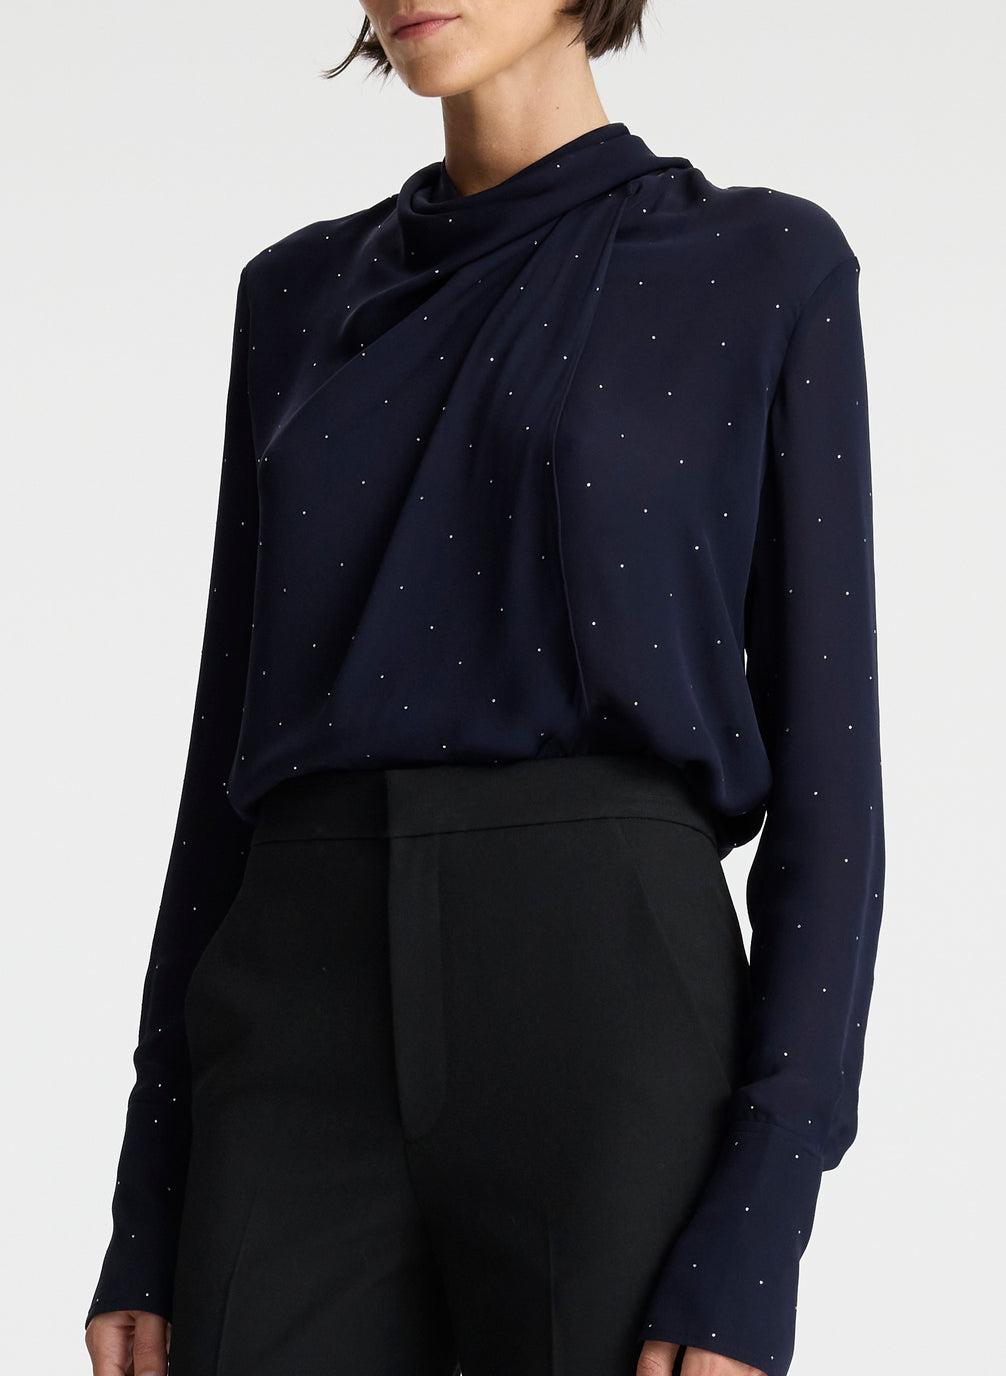 front view of woman wearing navy blue silk long sleeve top with crystal embellishments and black pants 